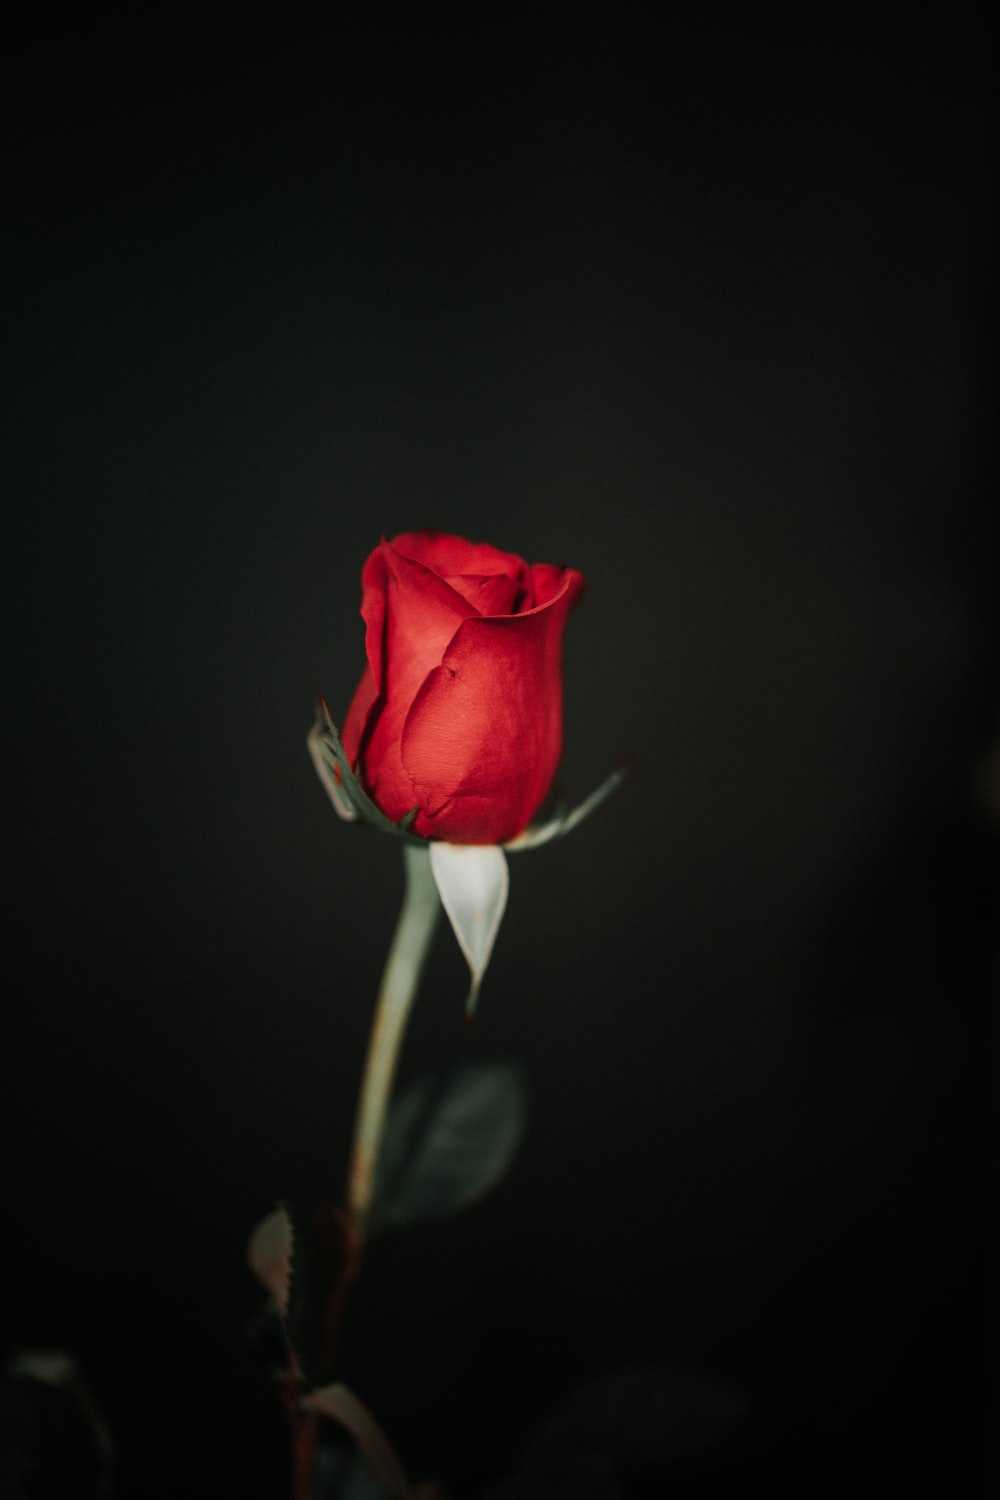 A single red rose in the dark - Roses